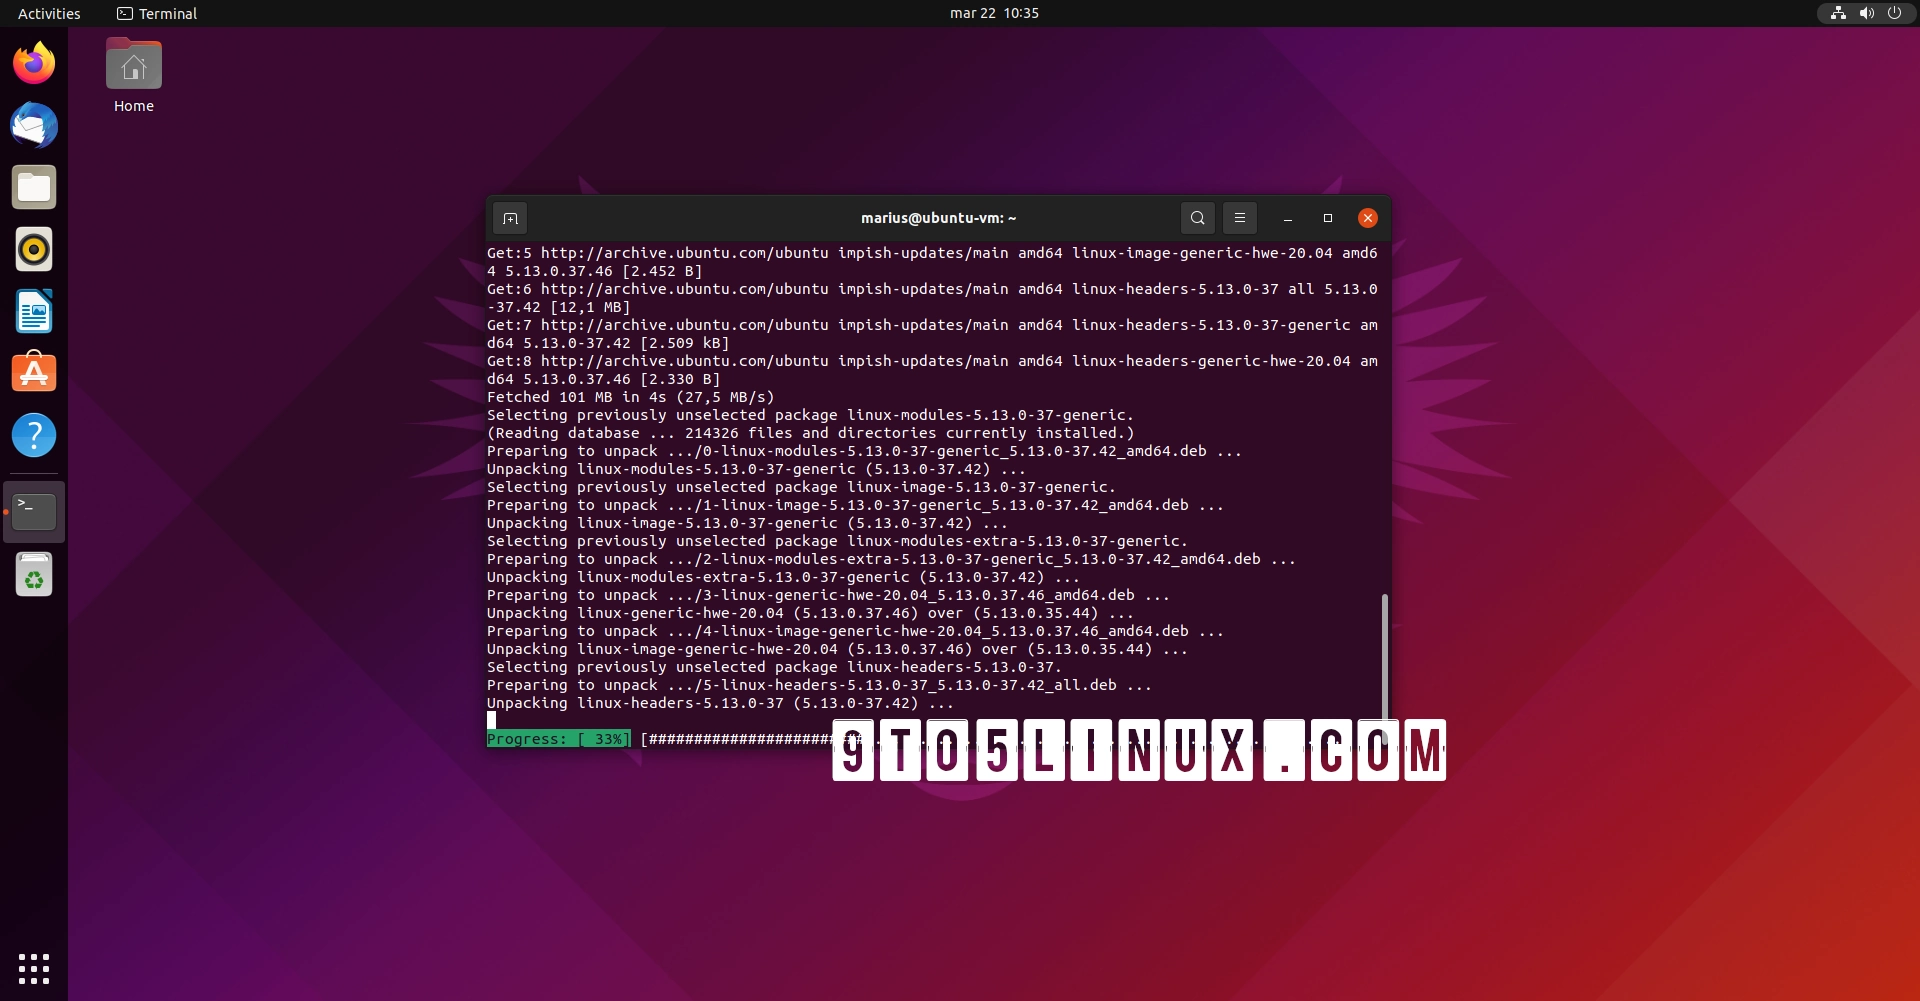 Ubuntu Users Receive a New Major Linux Kernel Update, 22 Security Flaws Patched